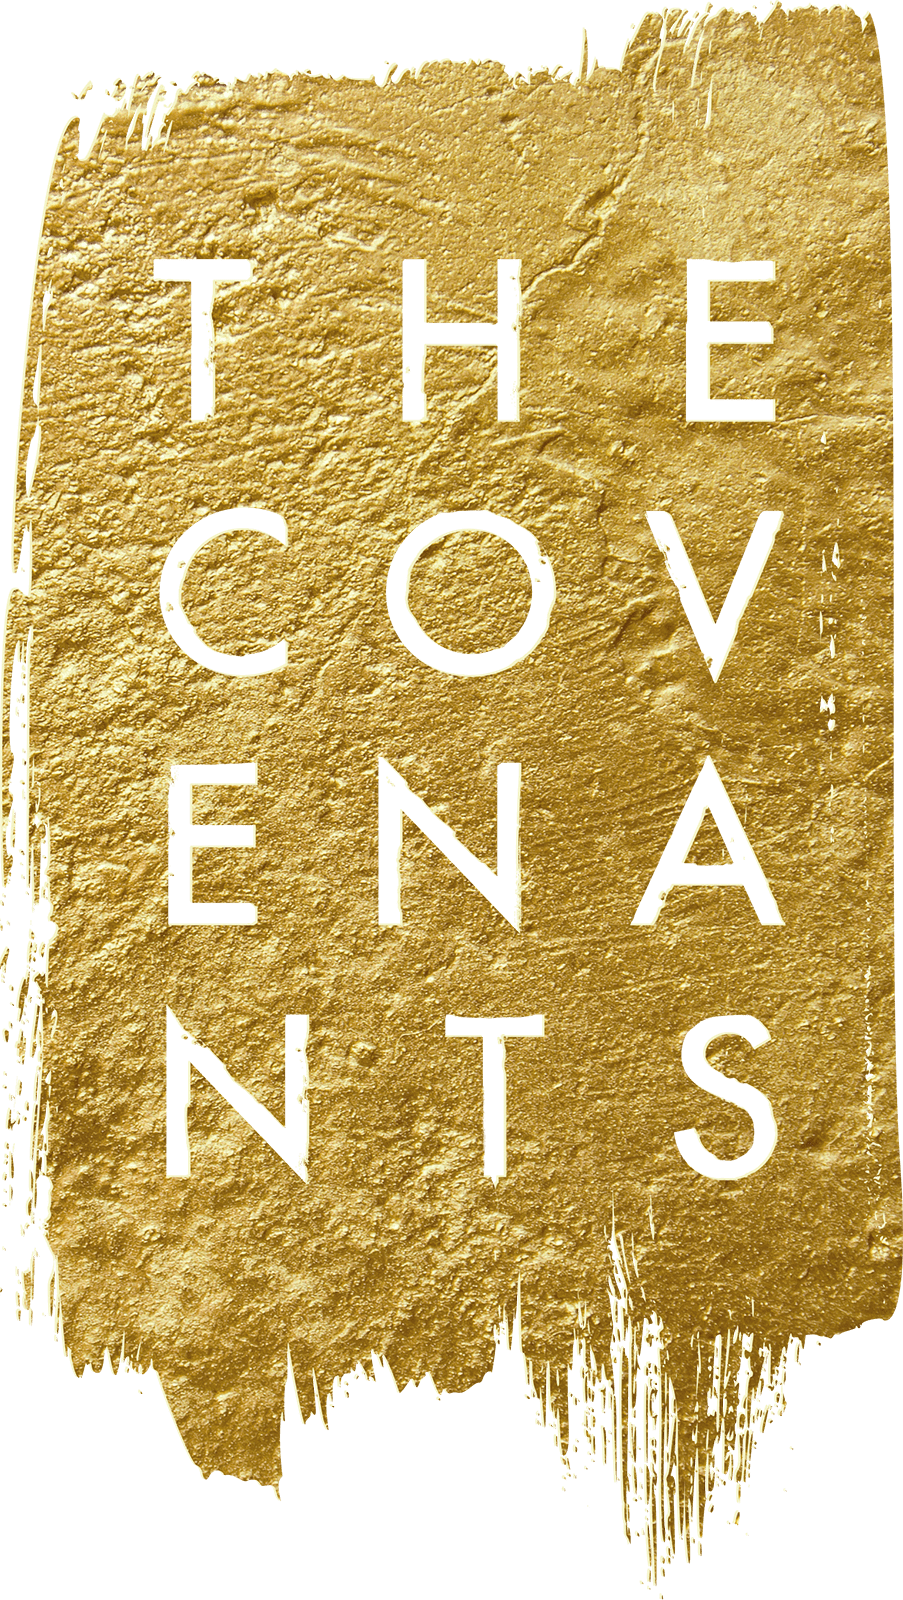 The Covenants